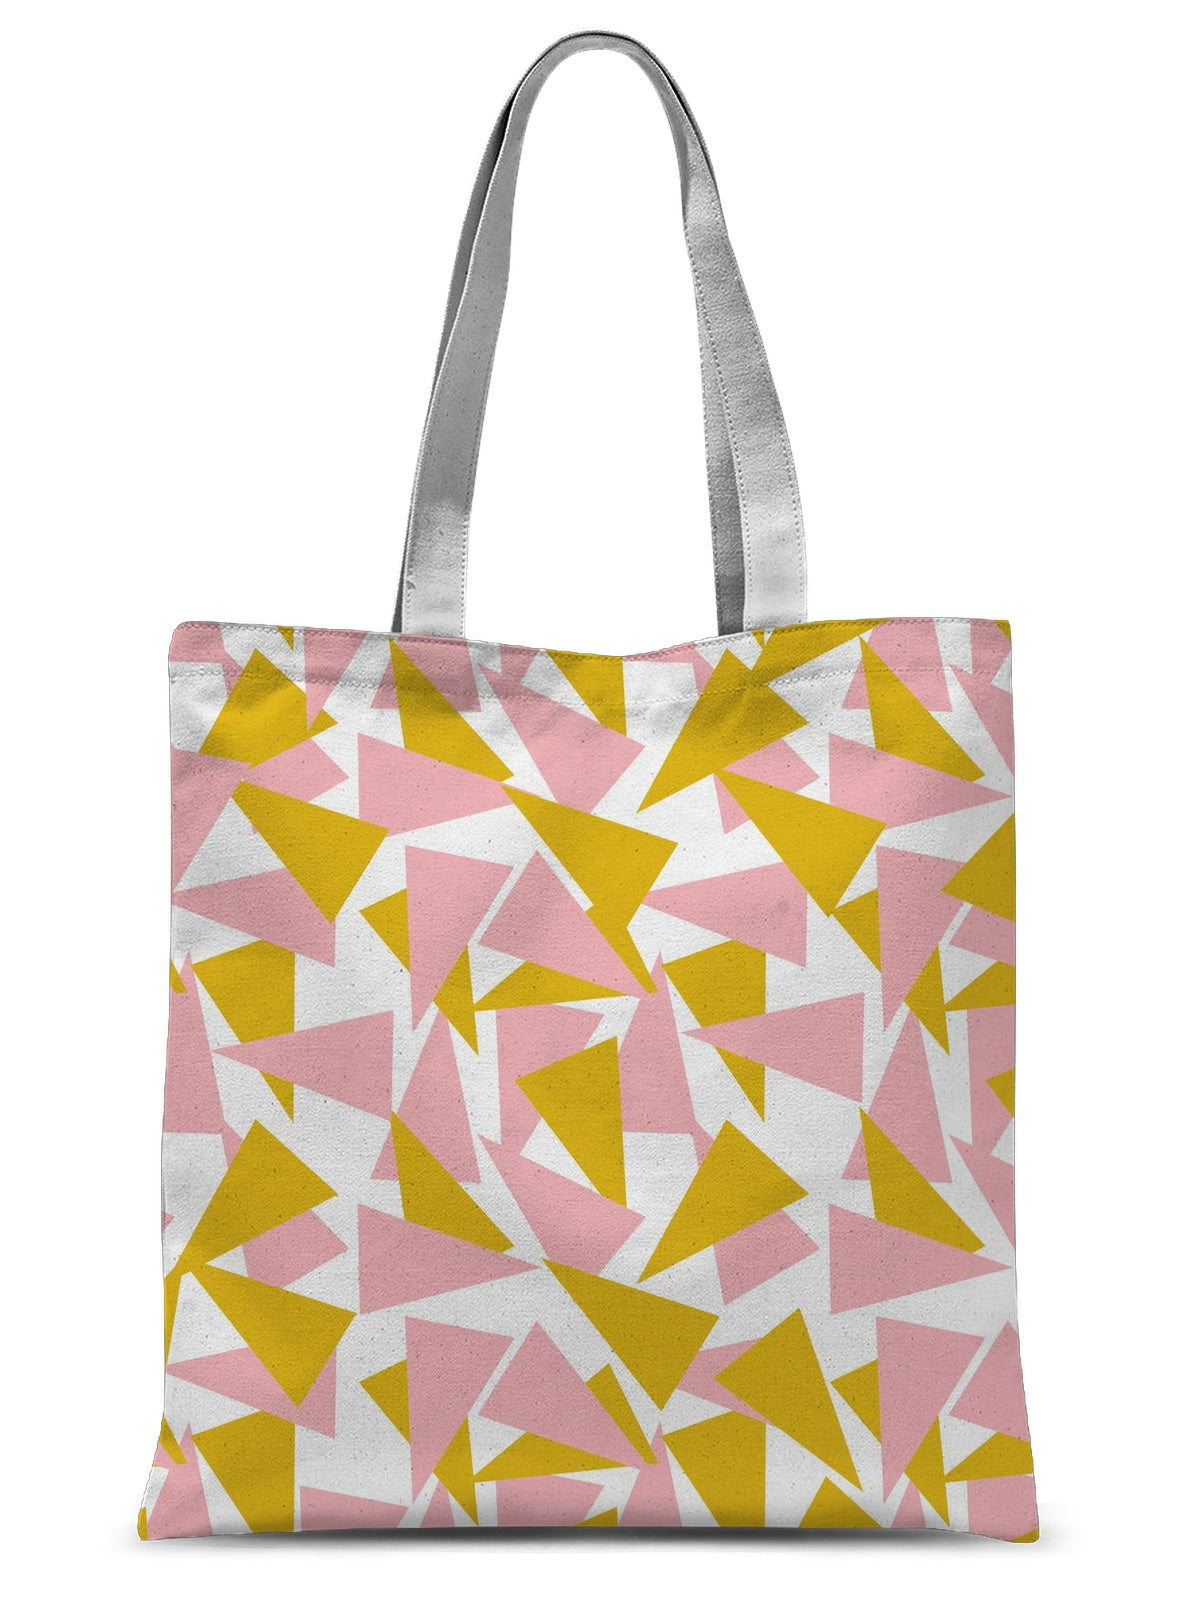 This Mid-Century Modern style tote bag pattern design consists of colorful pink and orange geometric triangle shapes in a retro style deign pattern against a white background